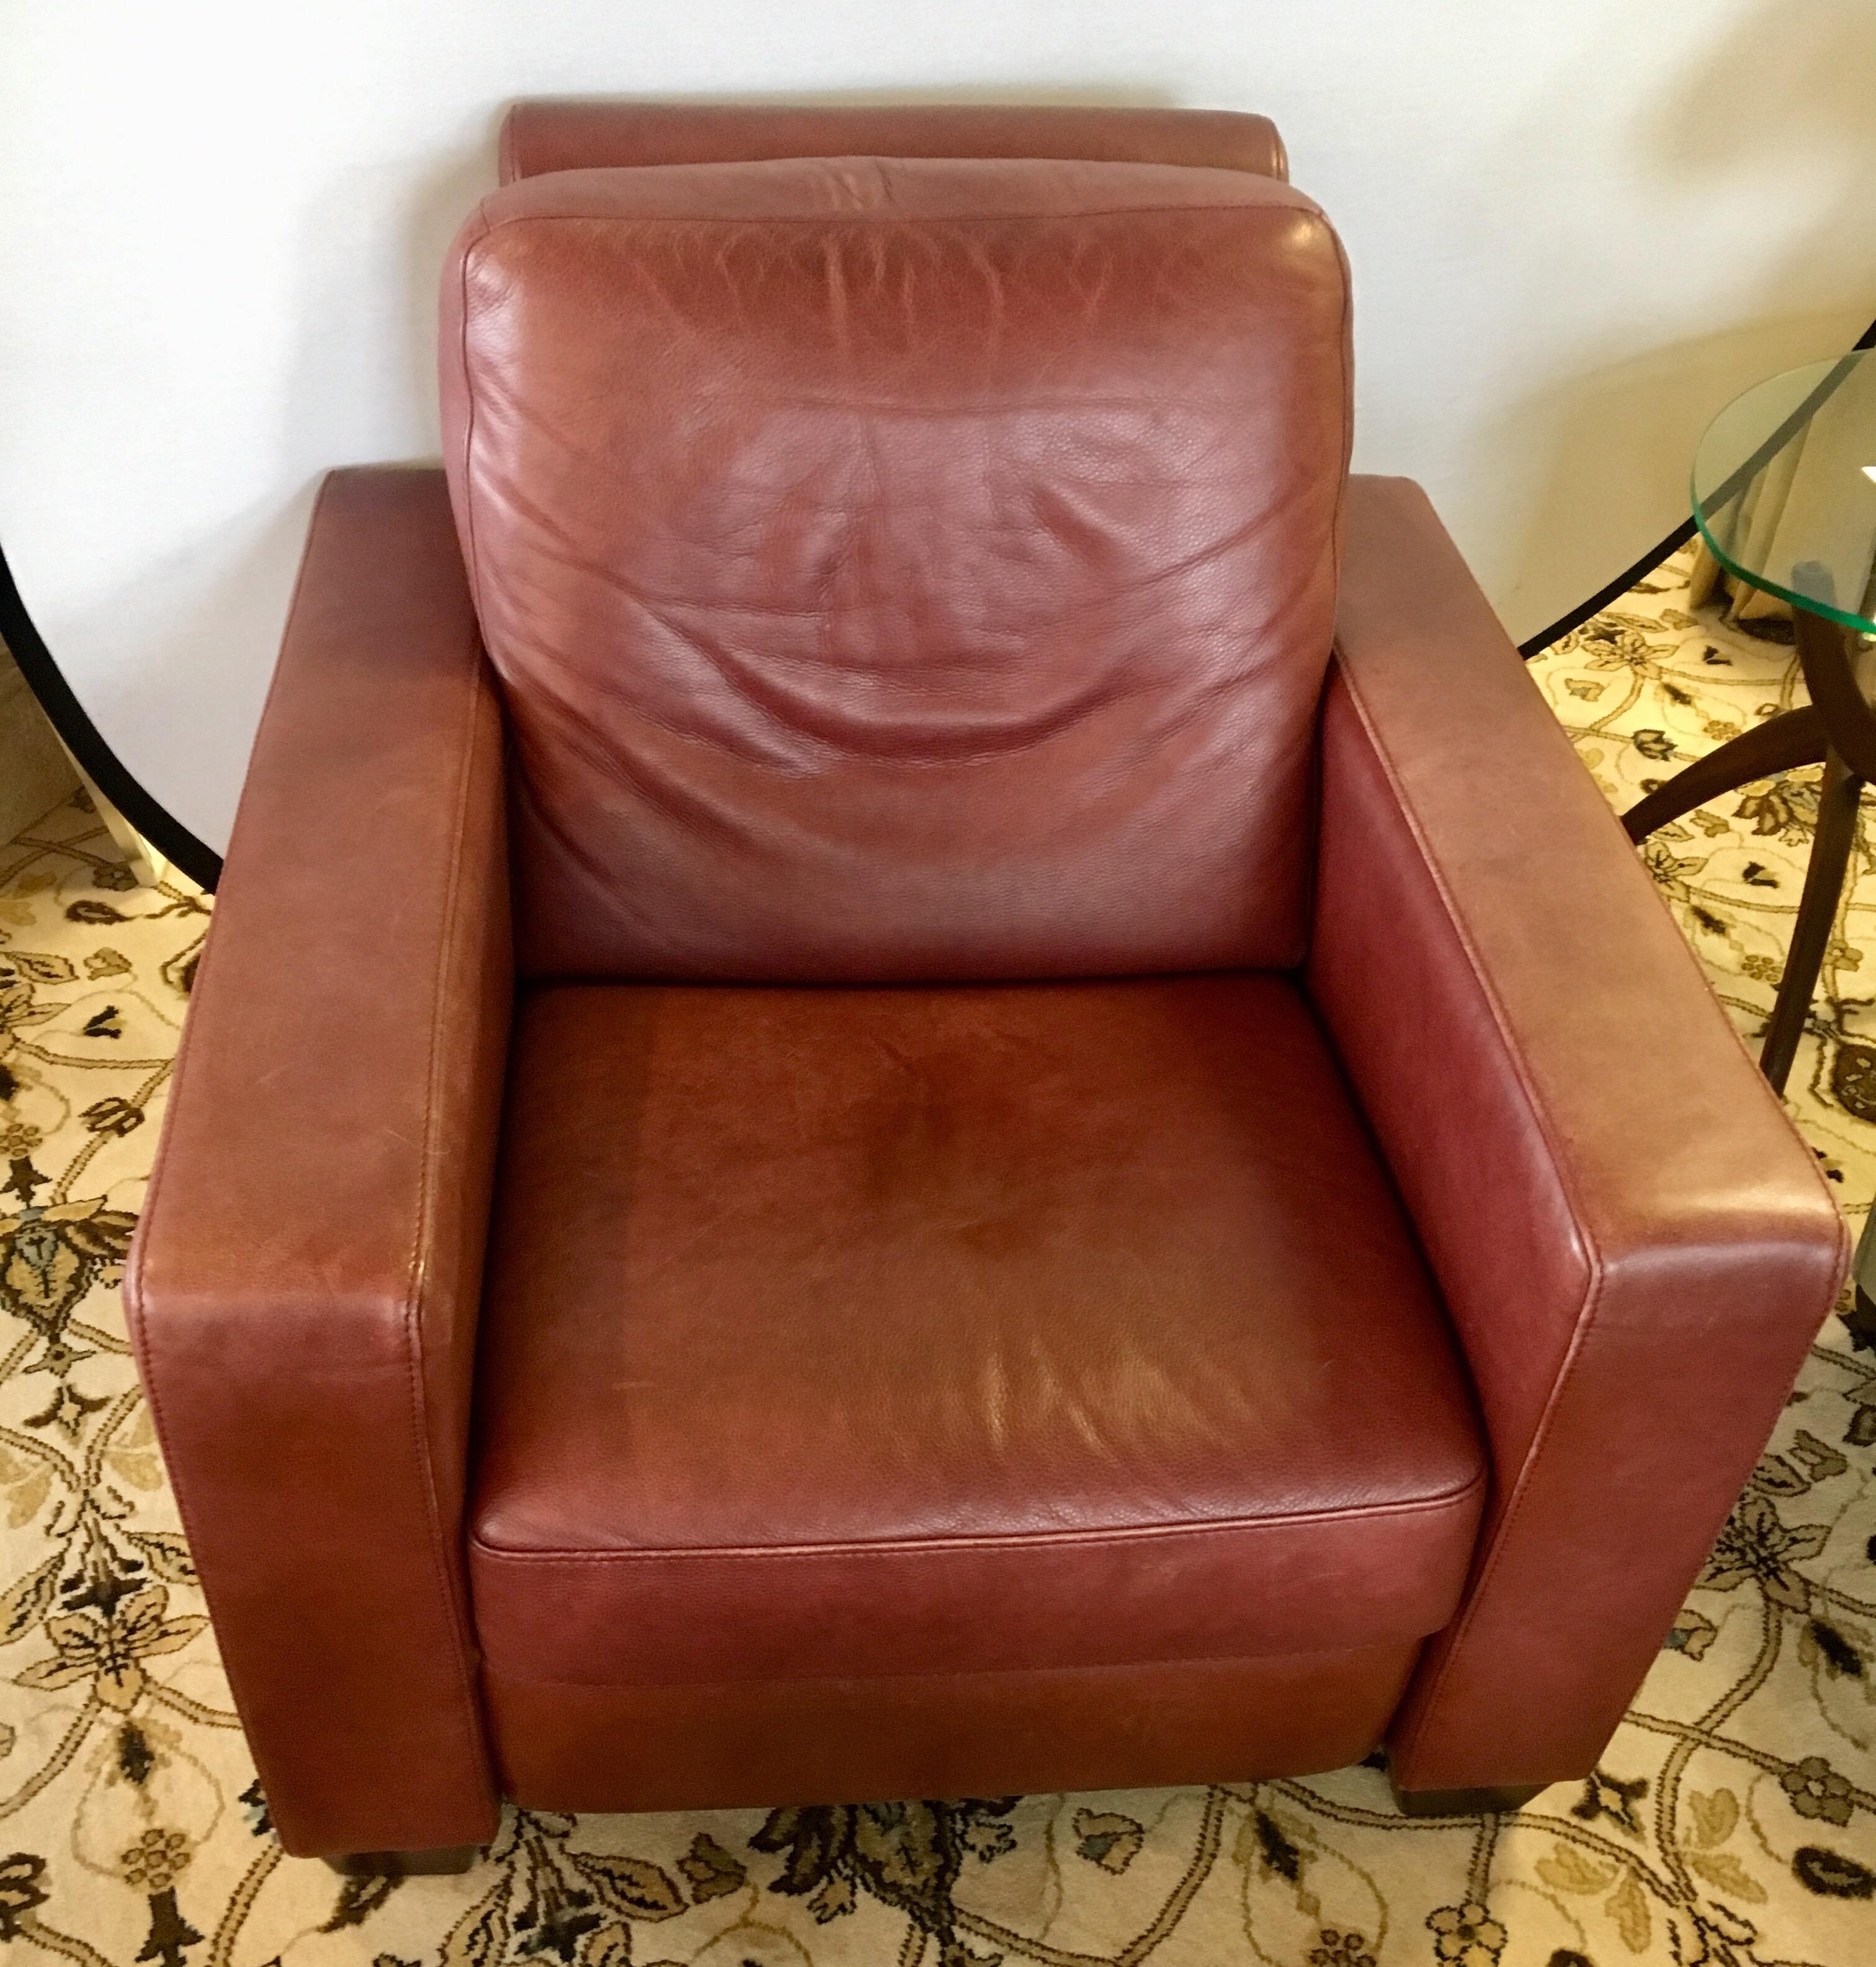 Late 20th Century Mid-Century Modern Pebbled Leather Reclining Lounge Cigar Chair